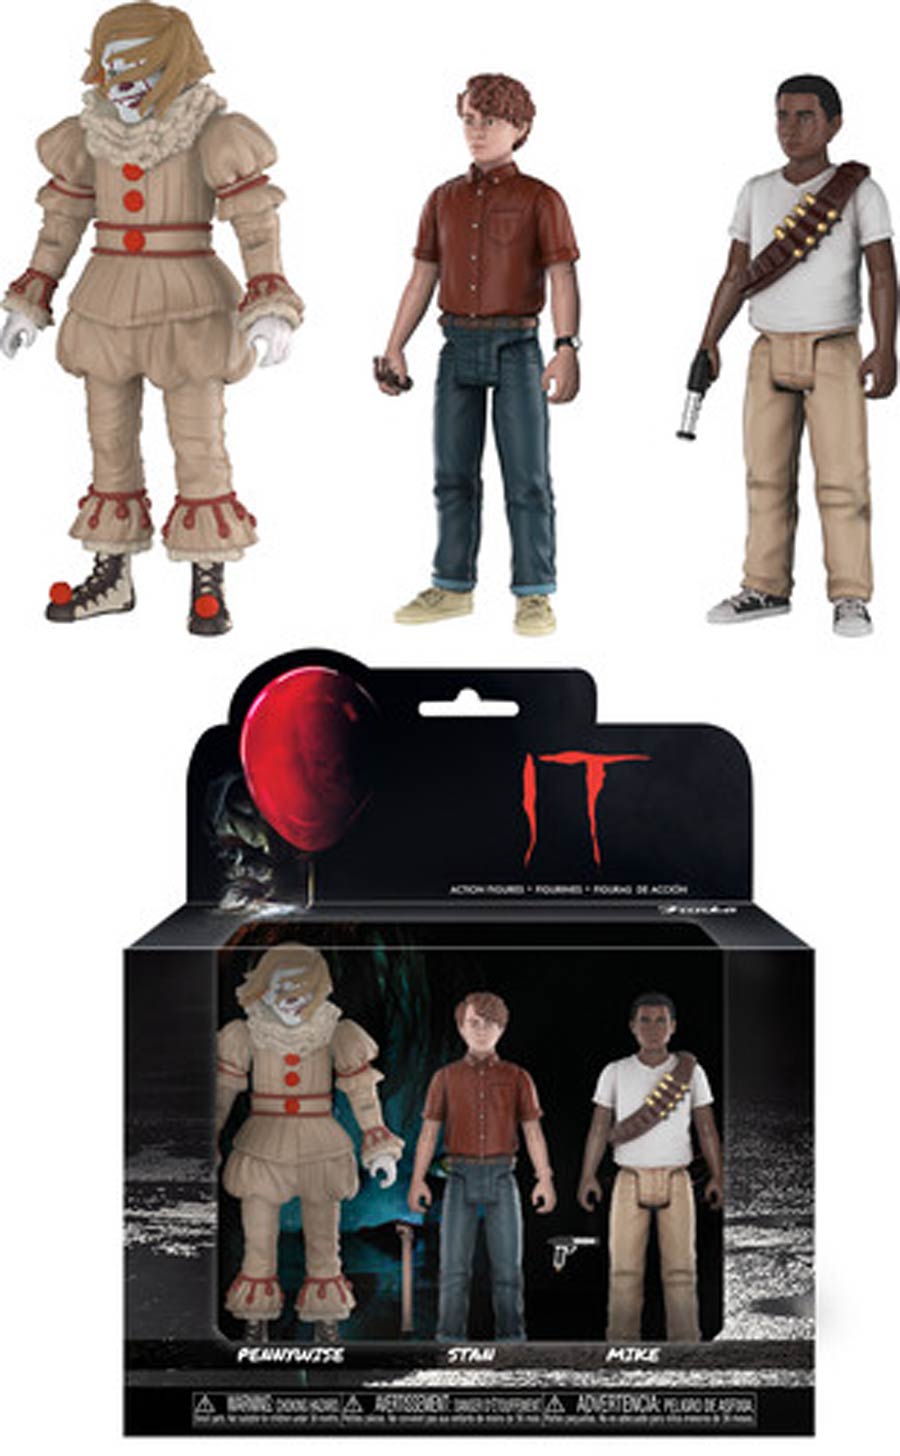 IT (2017) Pennywise Stan Mike 3-Pack Action Figure